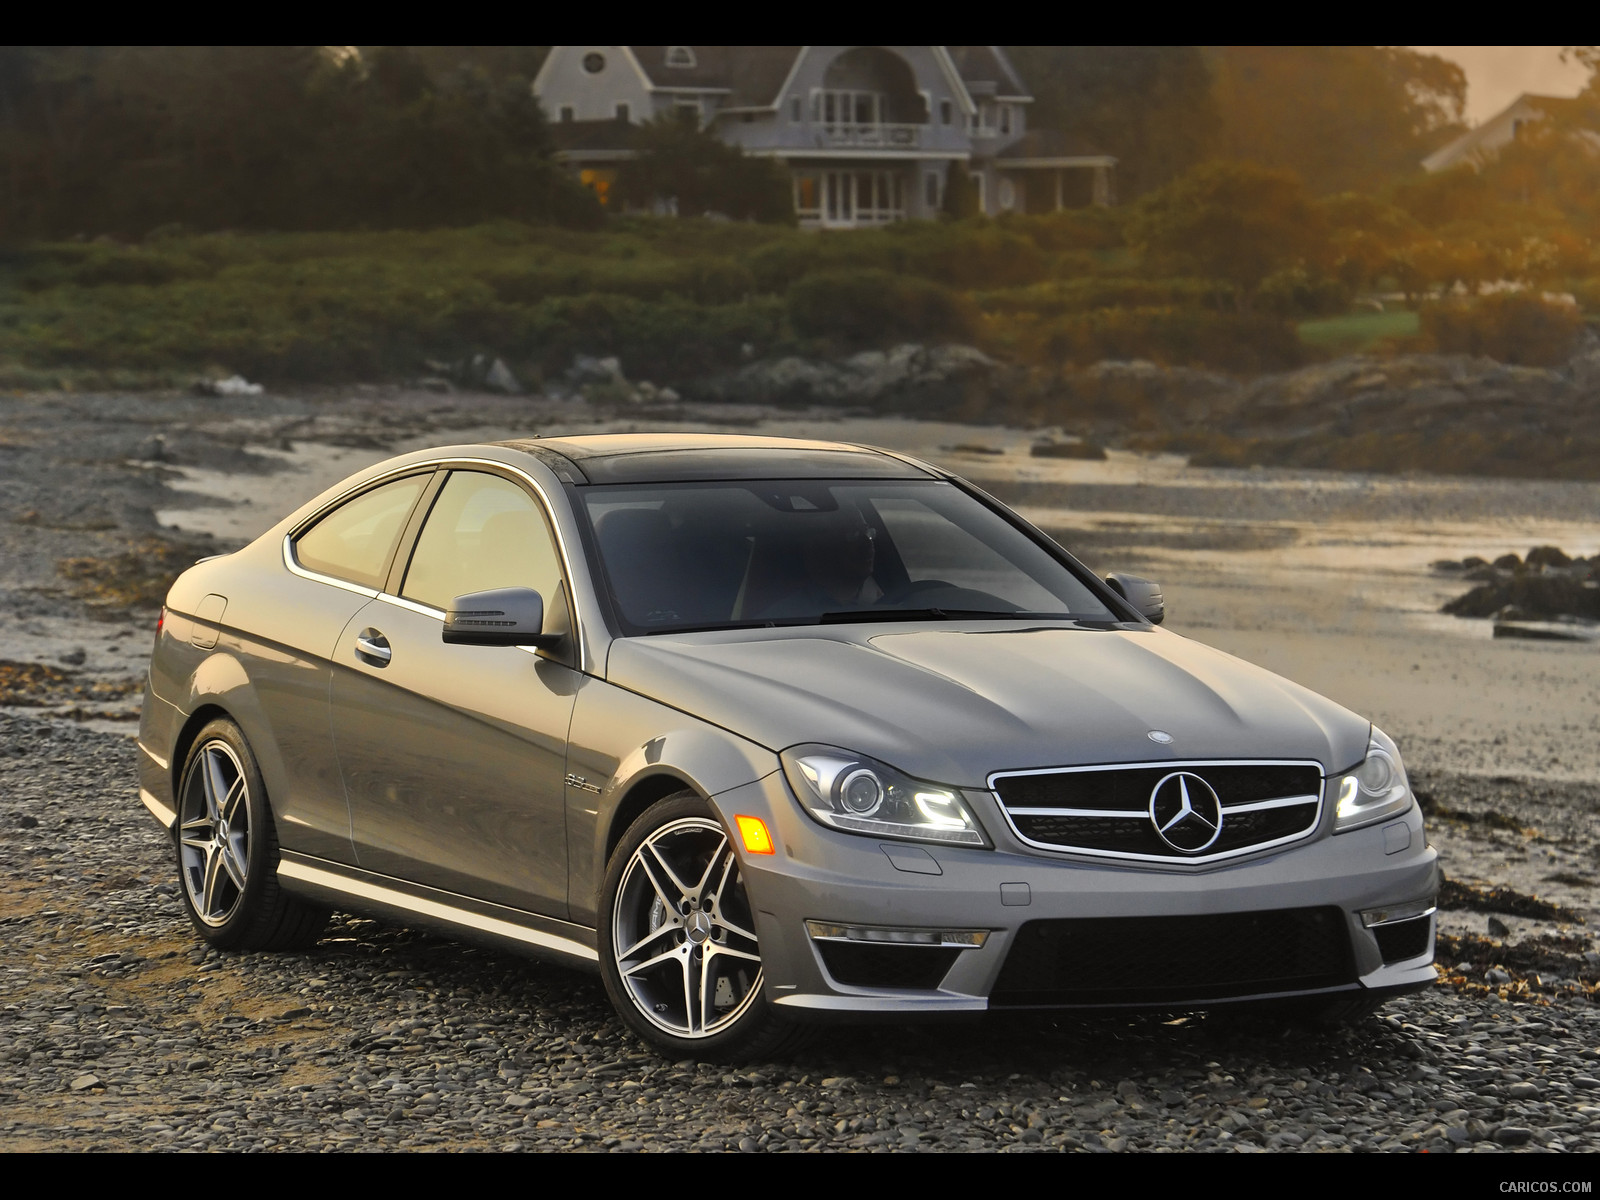 Mercedes-Benz C63 AMG Coupe (2012) with MCT transmission - , #9 of 64